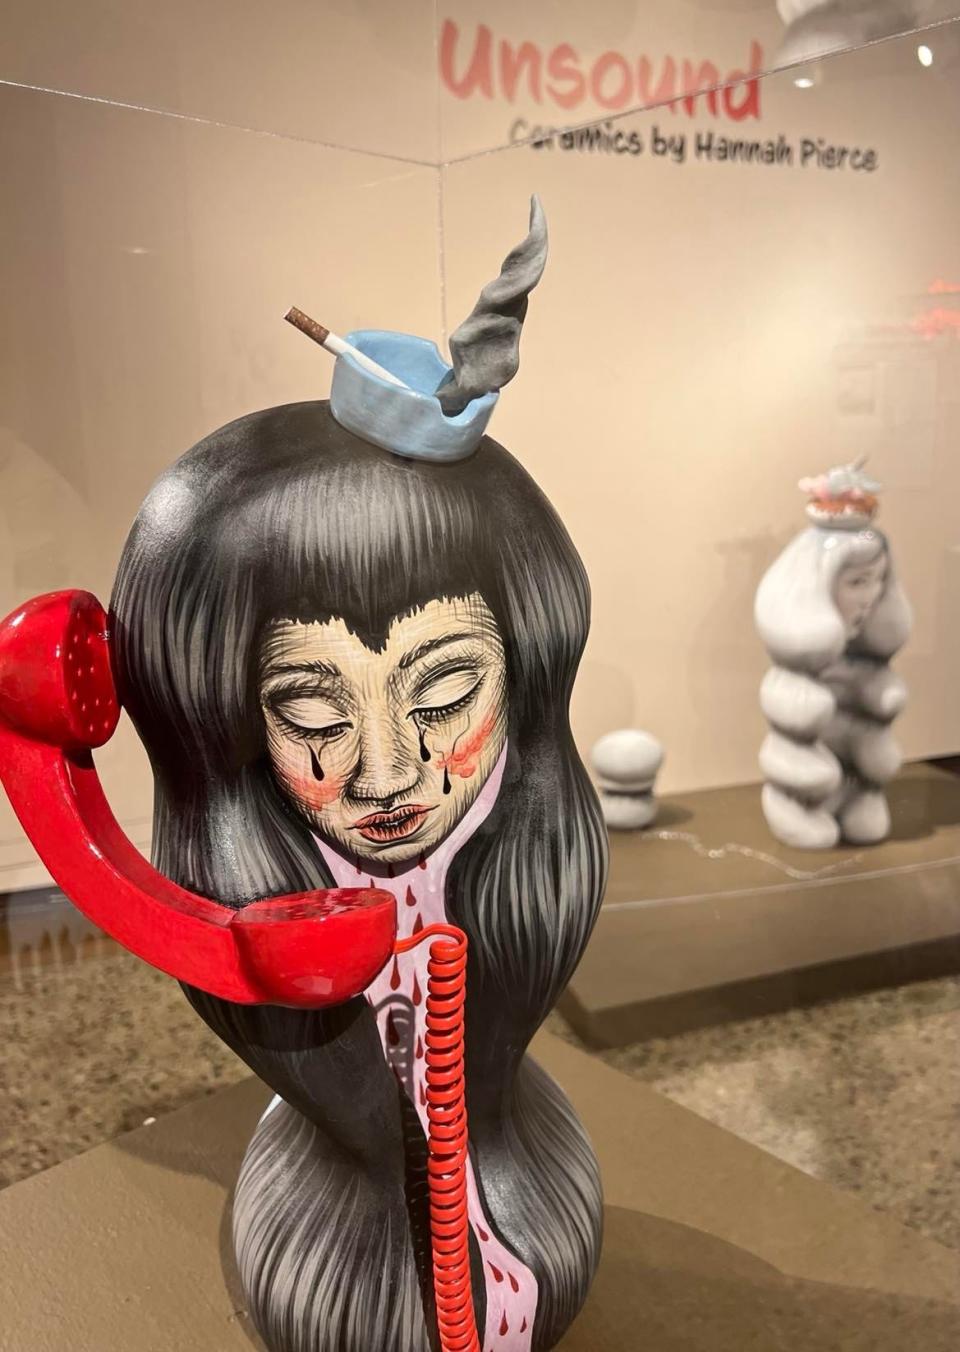 "Unsound" is the title of Hannah Pierce's ceramic sculpture exhibit at the Canton Museum of Art on display through March 6.